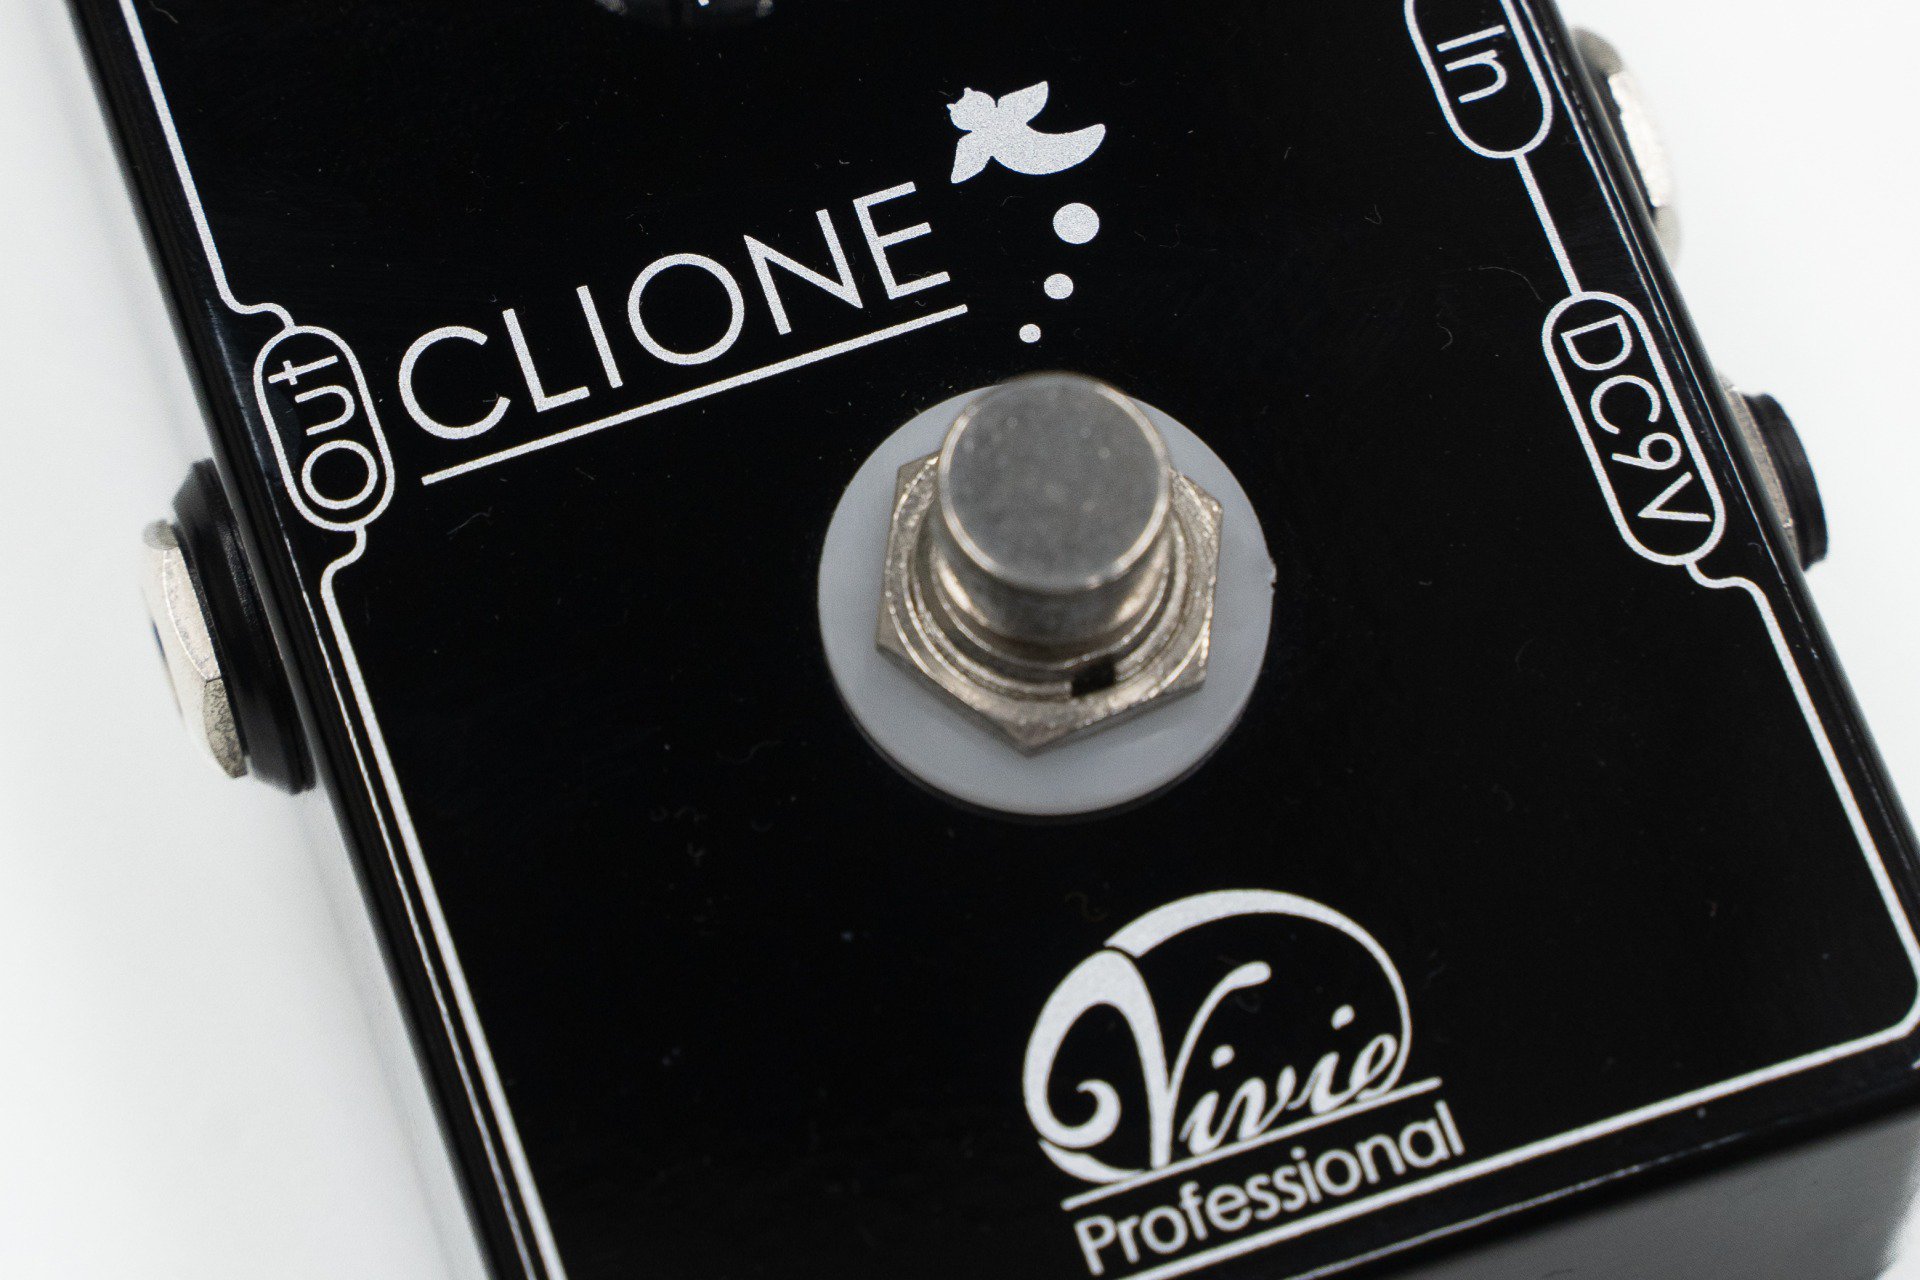 used】Vivie / CLIONE #CL-00562【GIB横浜】 - Geek IN Box